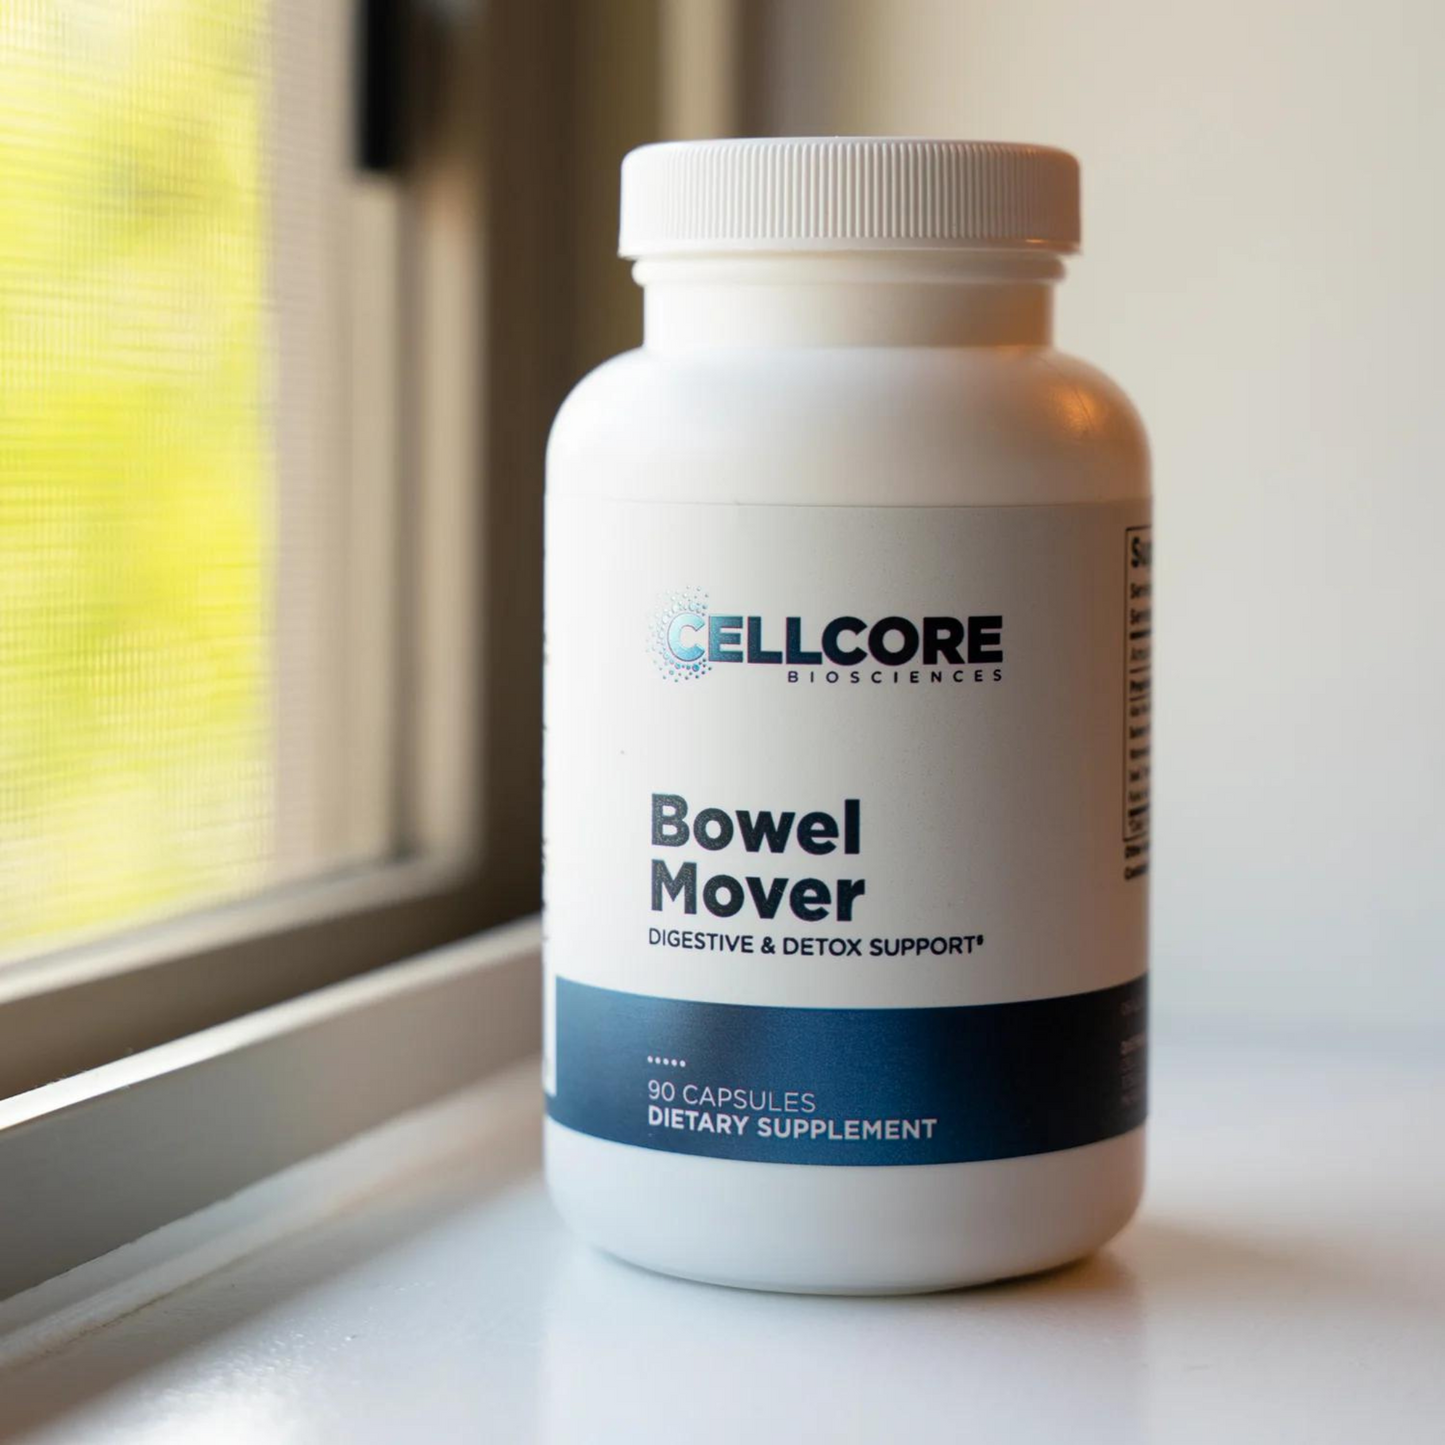 CellCore Bowel Mover uses